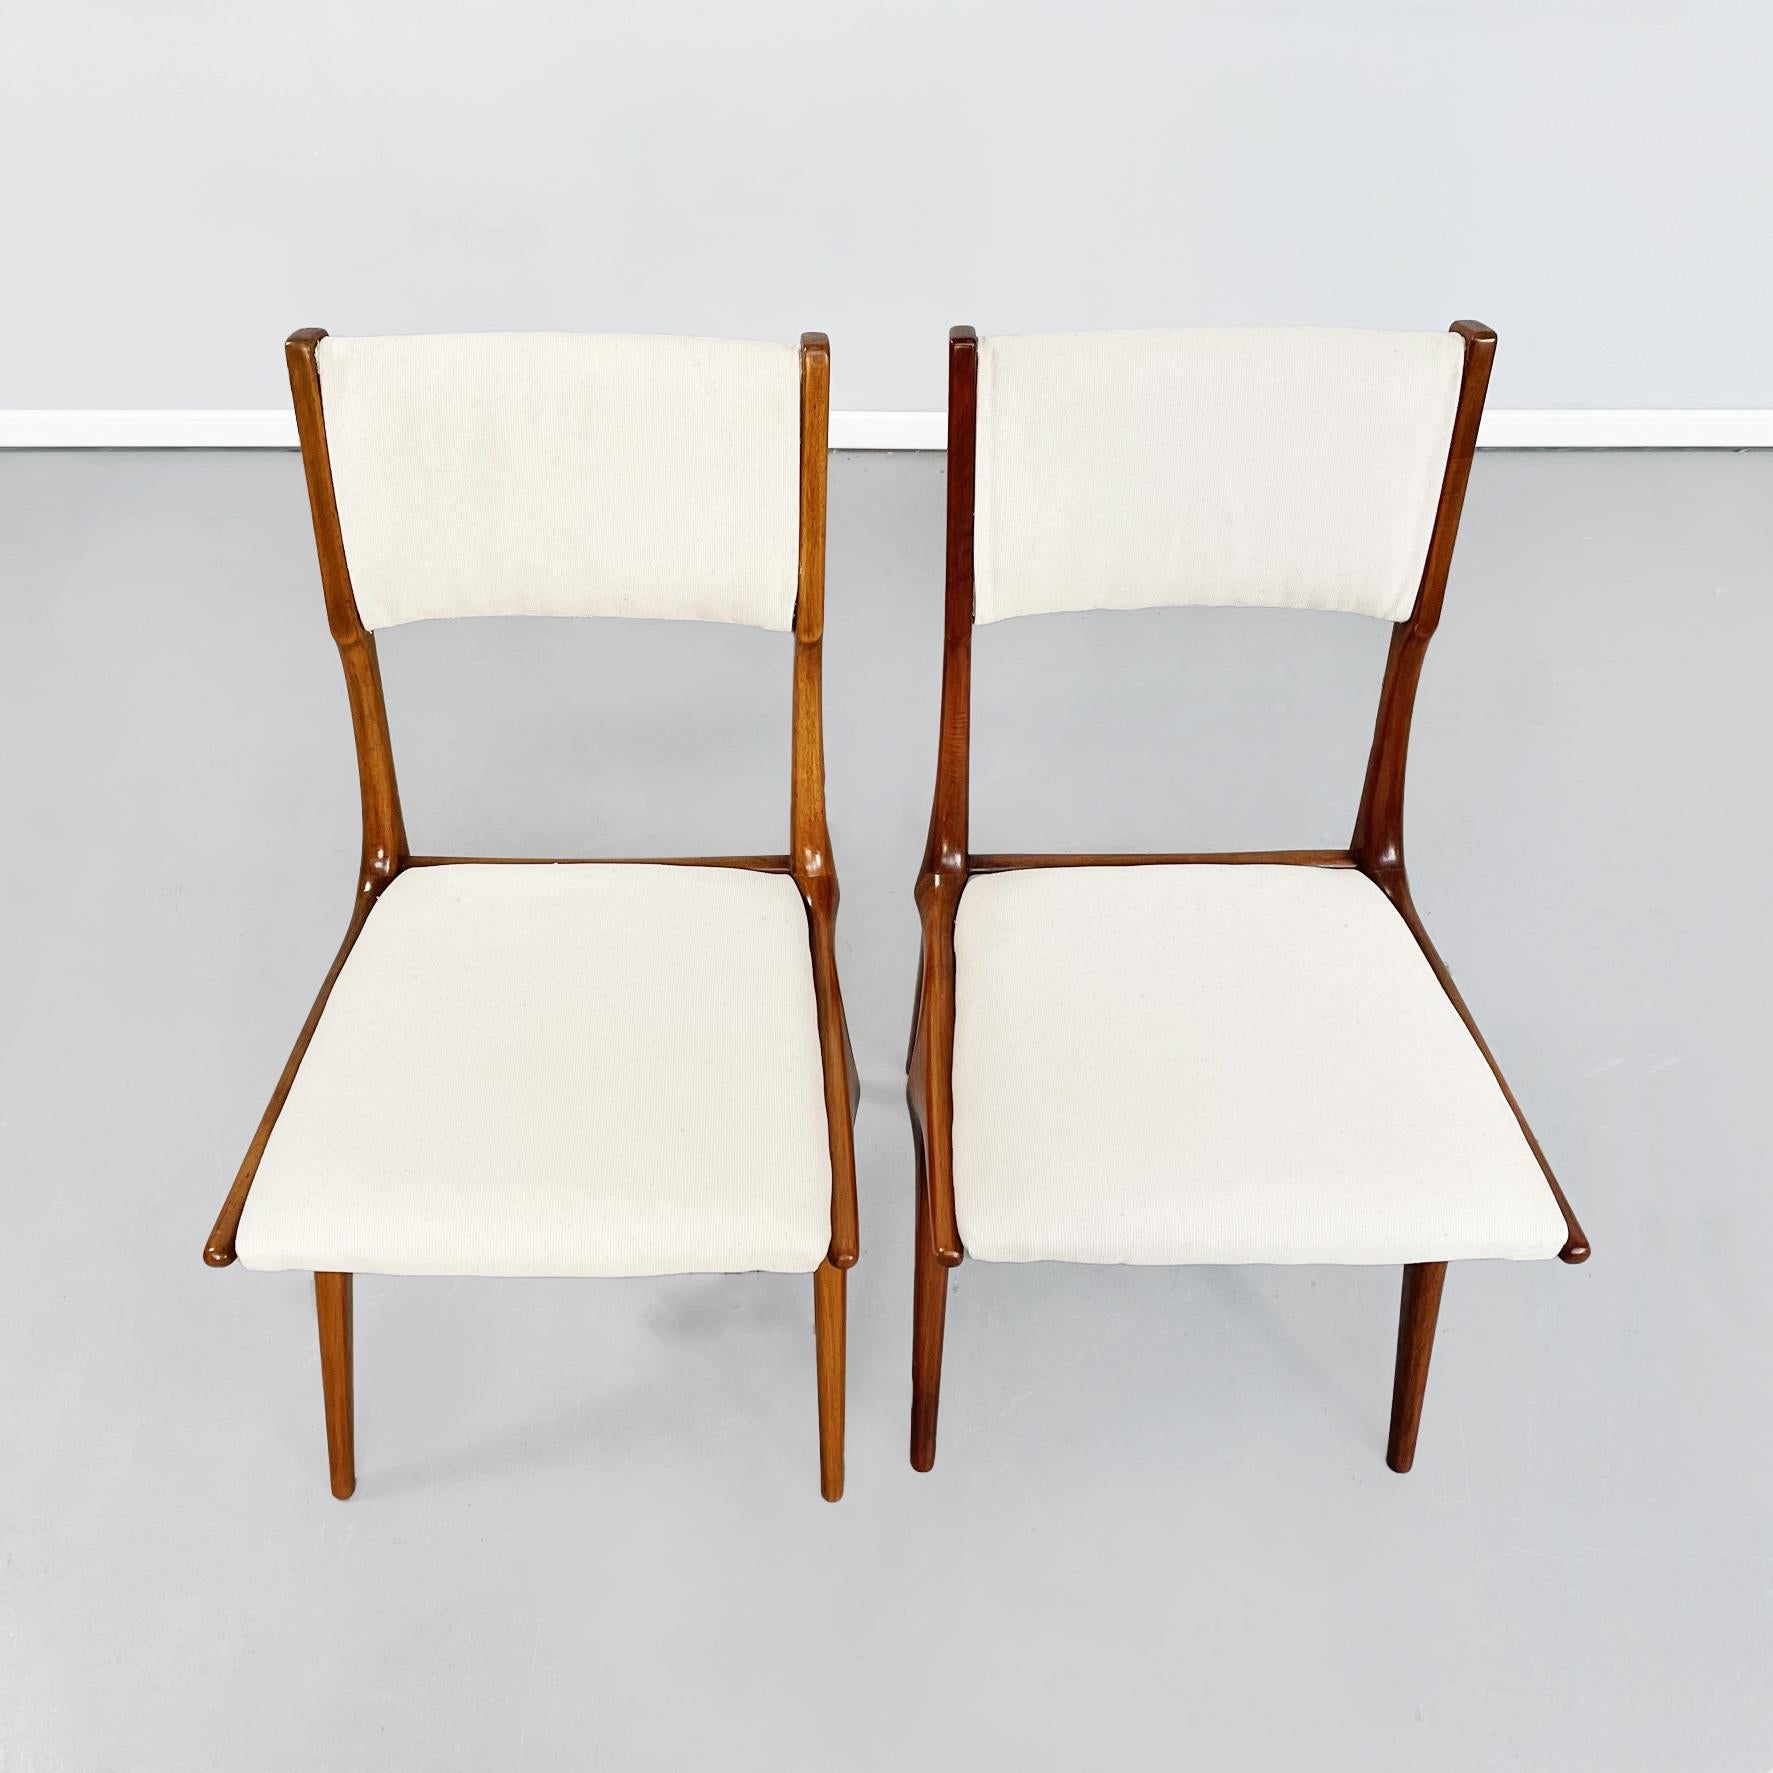 Italinan Mid-Century Modern White fabric and wood chairs by De Carli for Cassina, 1958
Pair of chairs with solid wood, elegant and rounded structure.
The seat and back are padded and upholstered in cream white fabric.
Produced by Cassina in 1950s